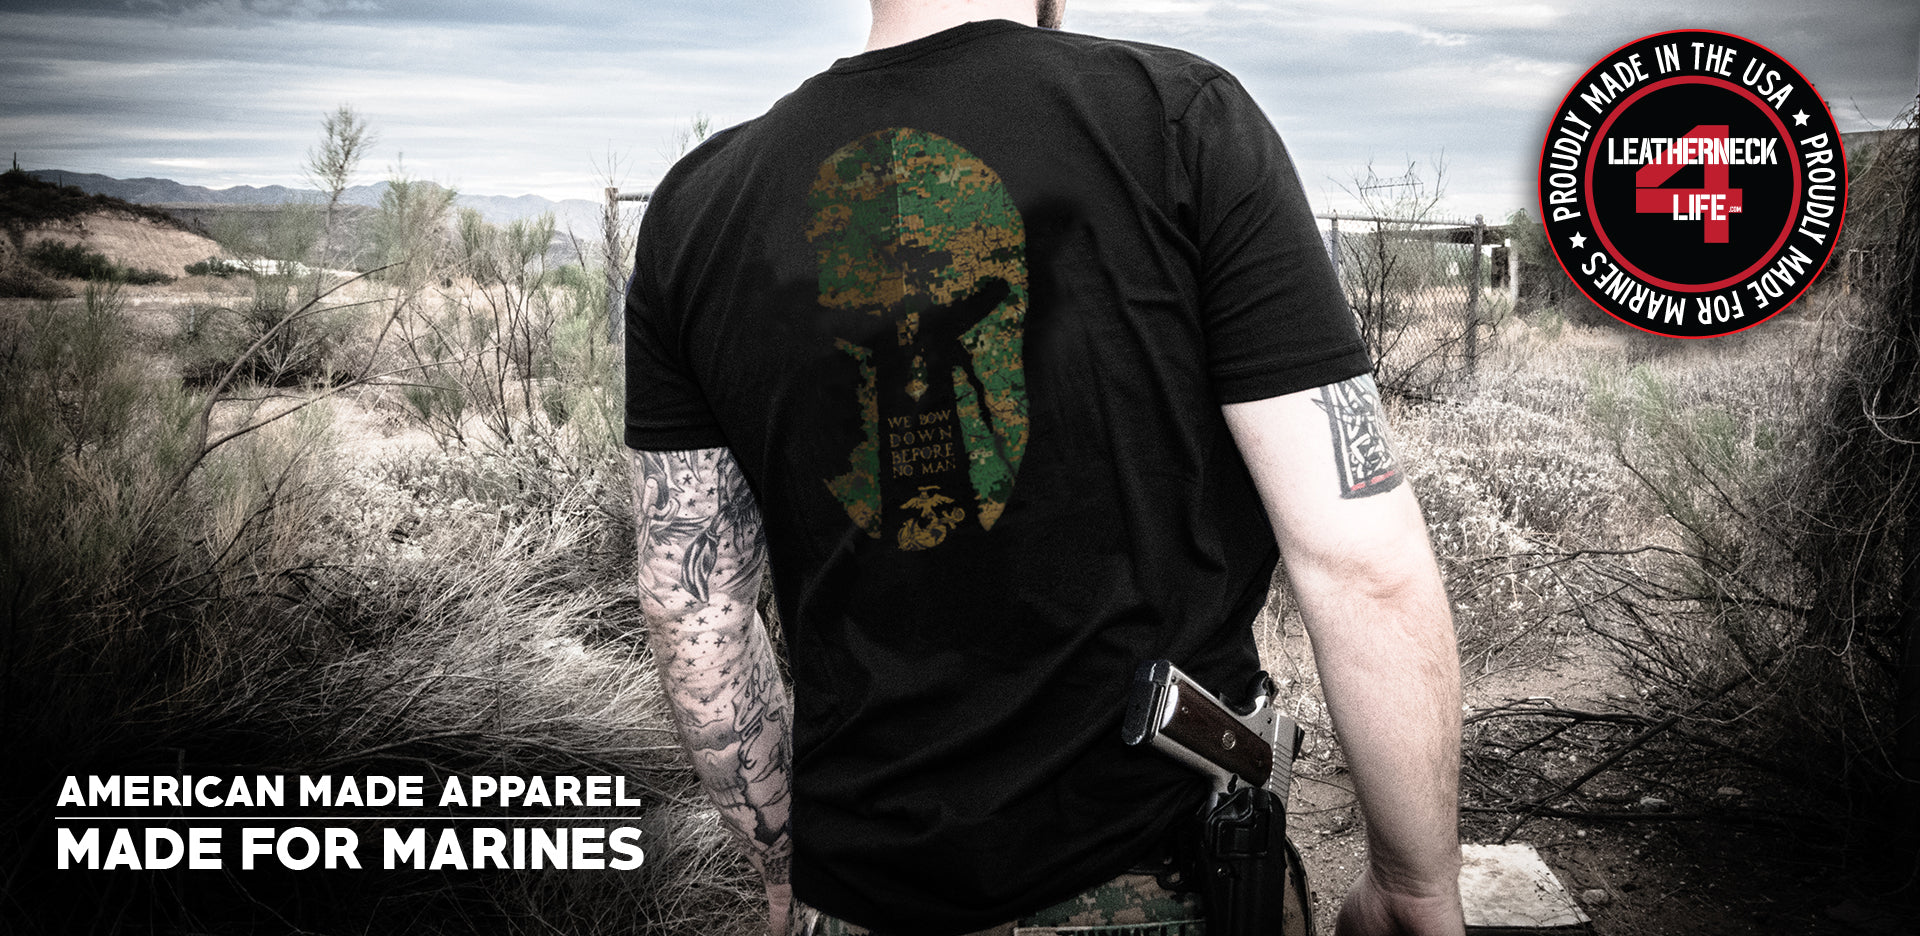 Leatherneck For Life - Your Source For USMC Clothing and Tactical Gear